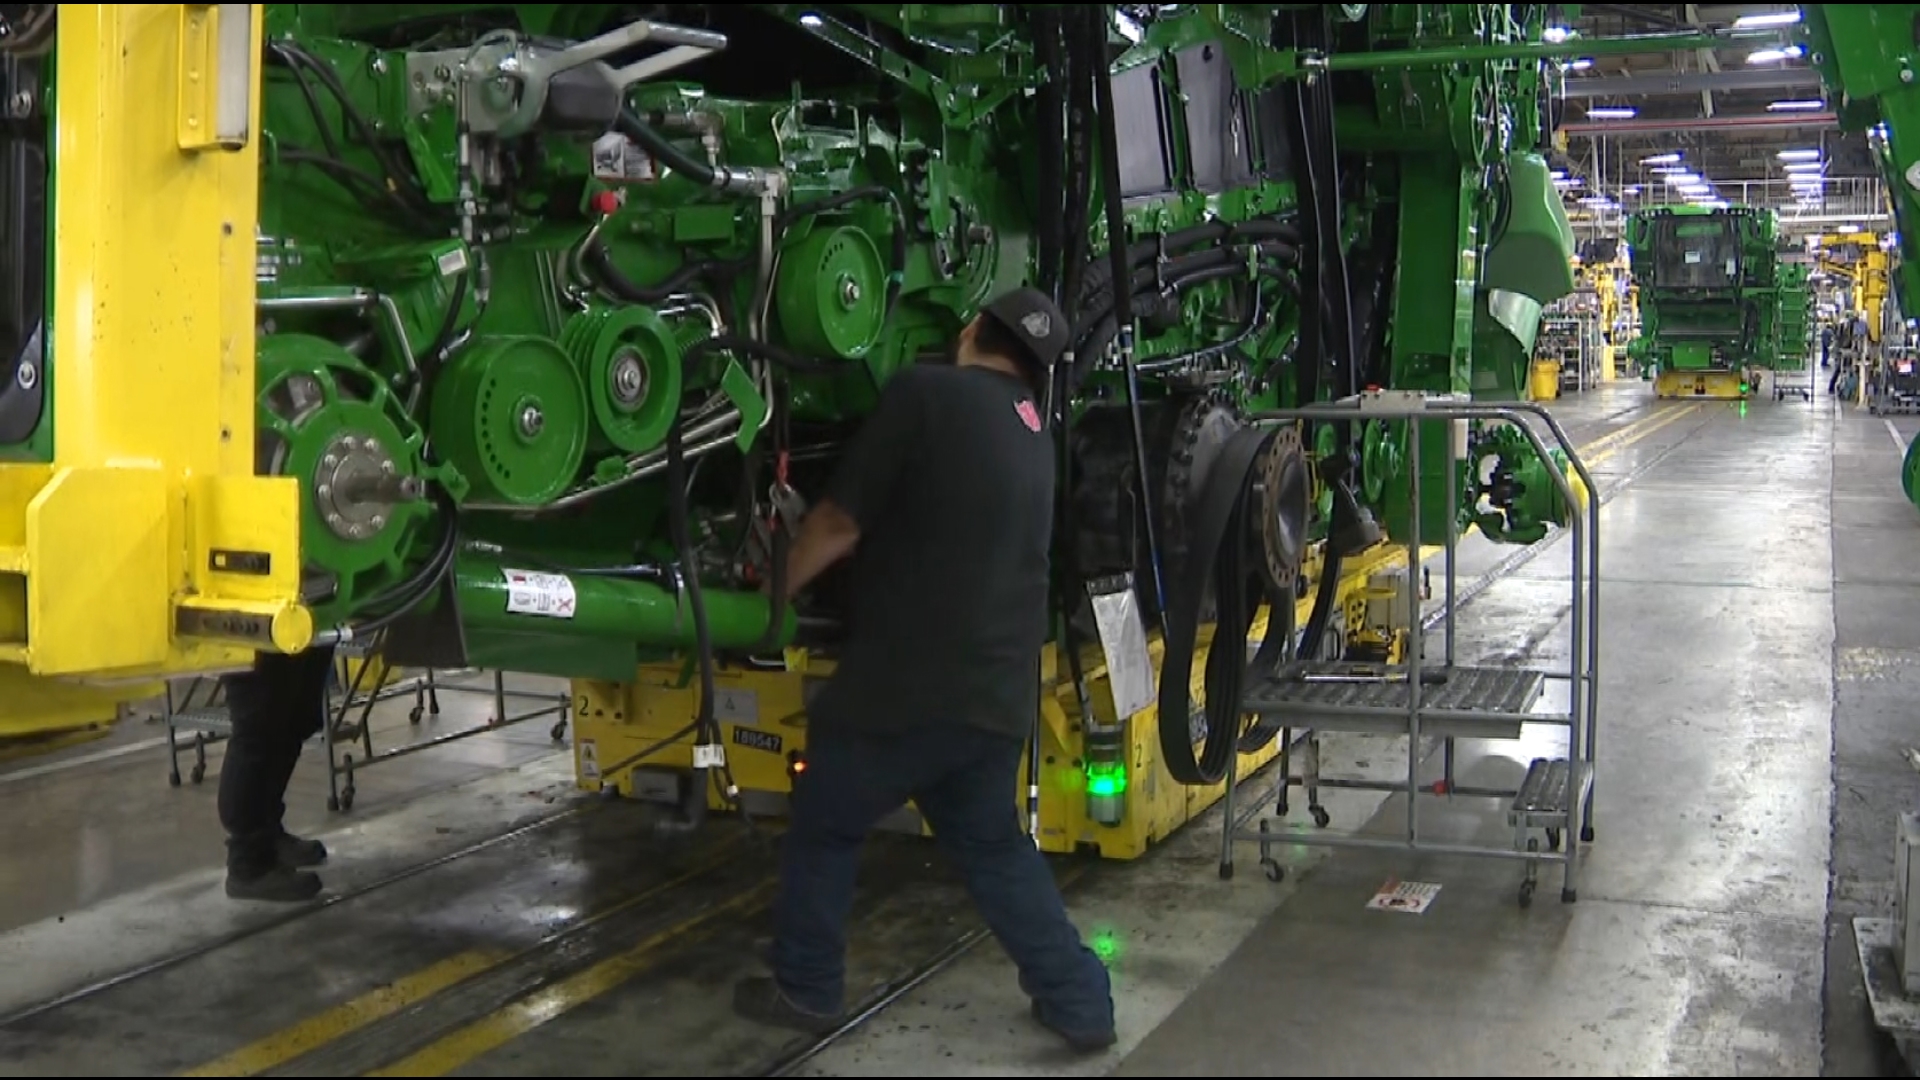 John Deere has informed around 600 production employees across three factories, including plants in East Moline and Davenport, that they will be laid off by Aug. 30.